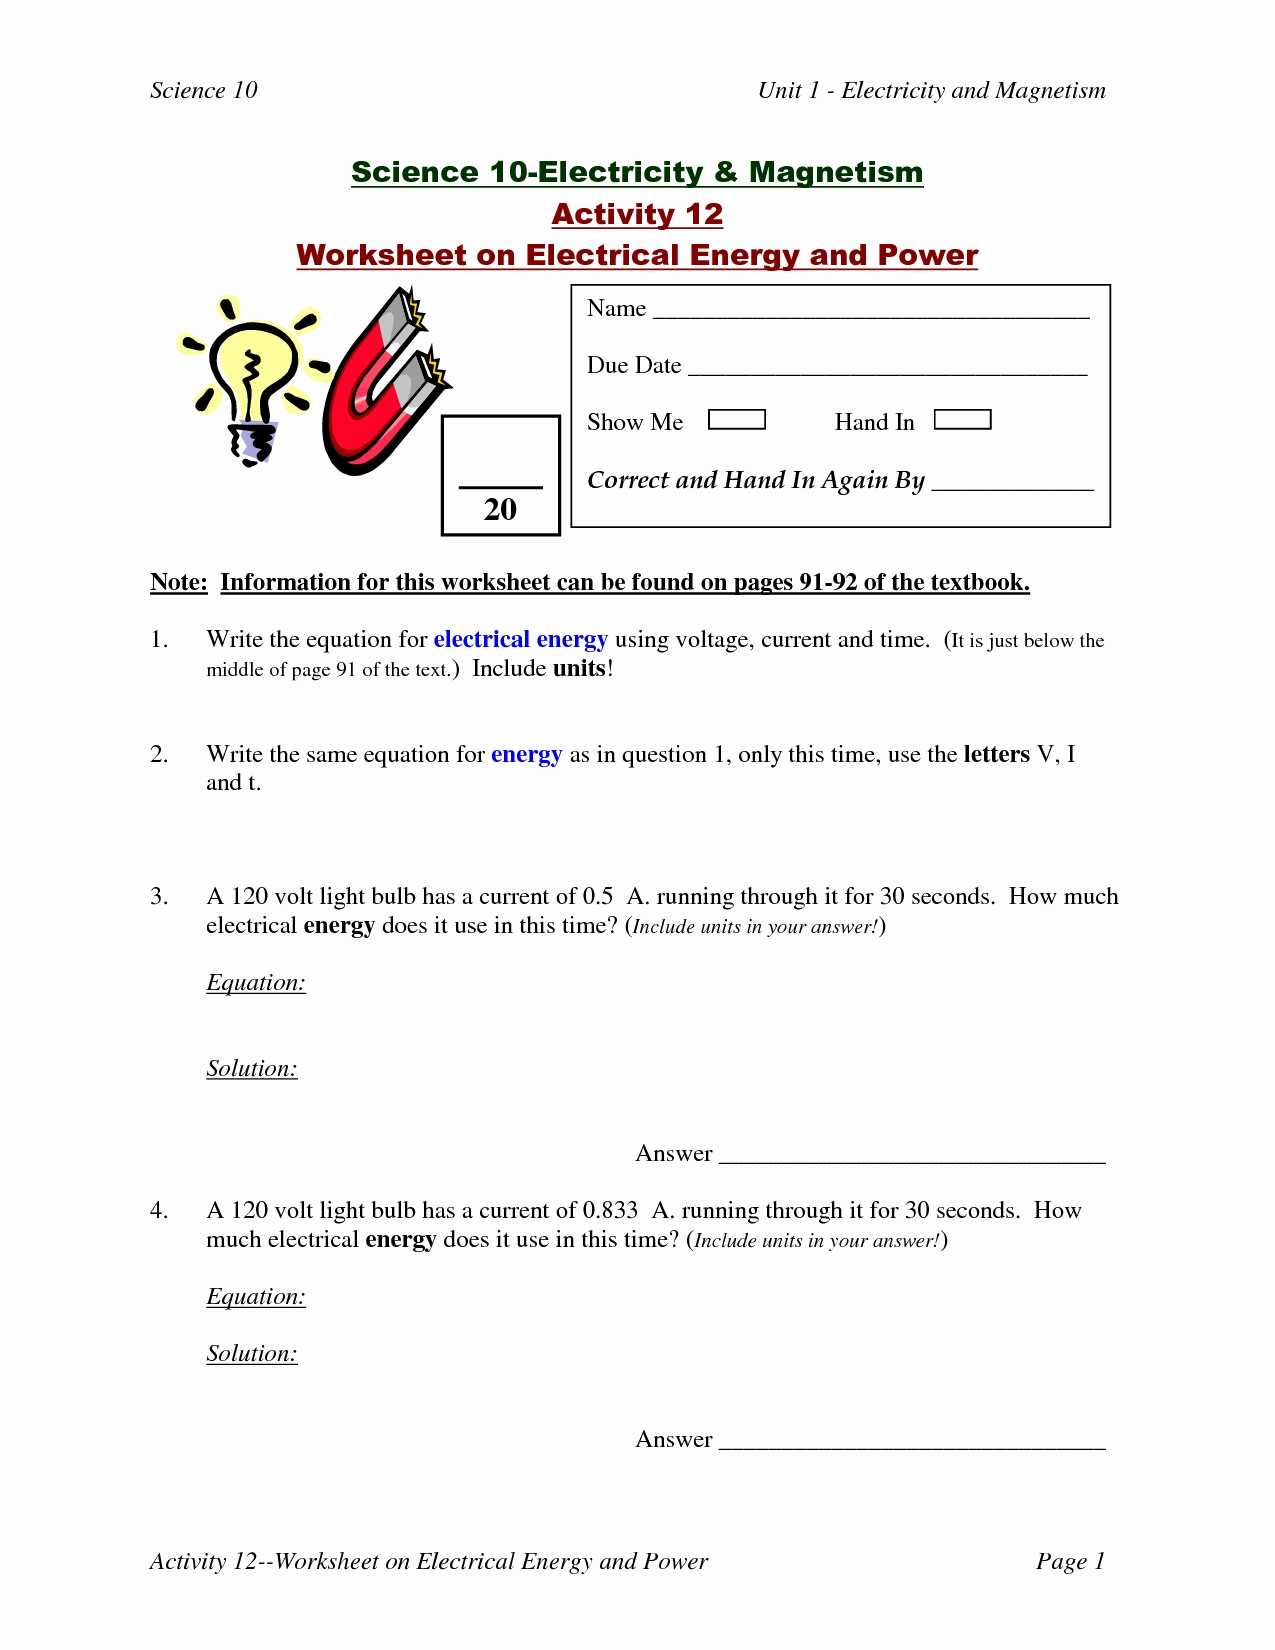 Electrical Power and Energy Worksheet together with Dave Ramsey Printable Worksheets Learn About Writing Chemical